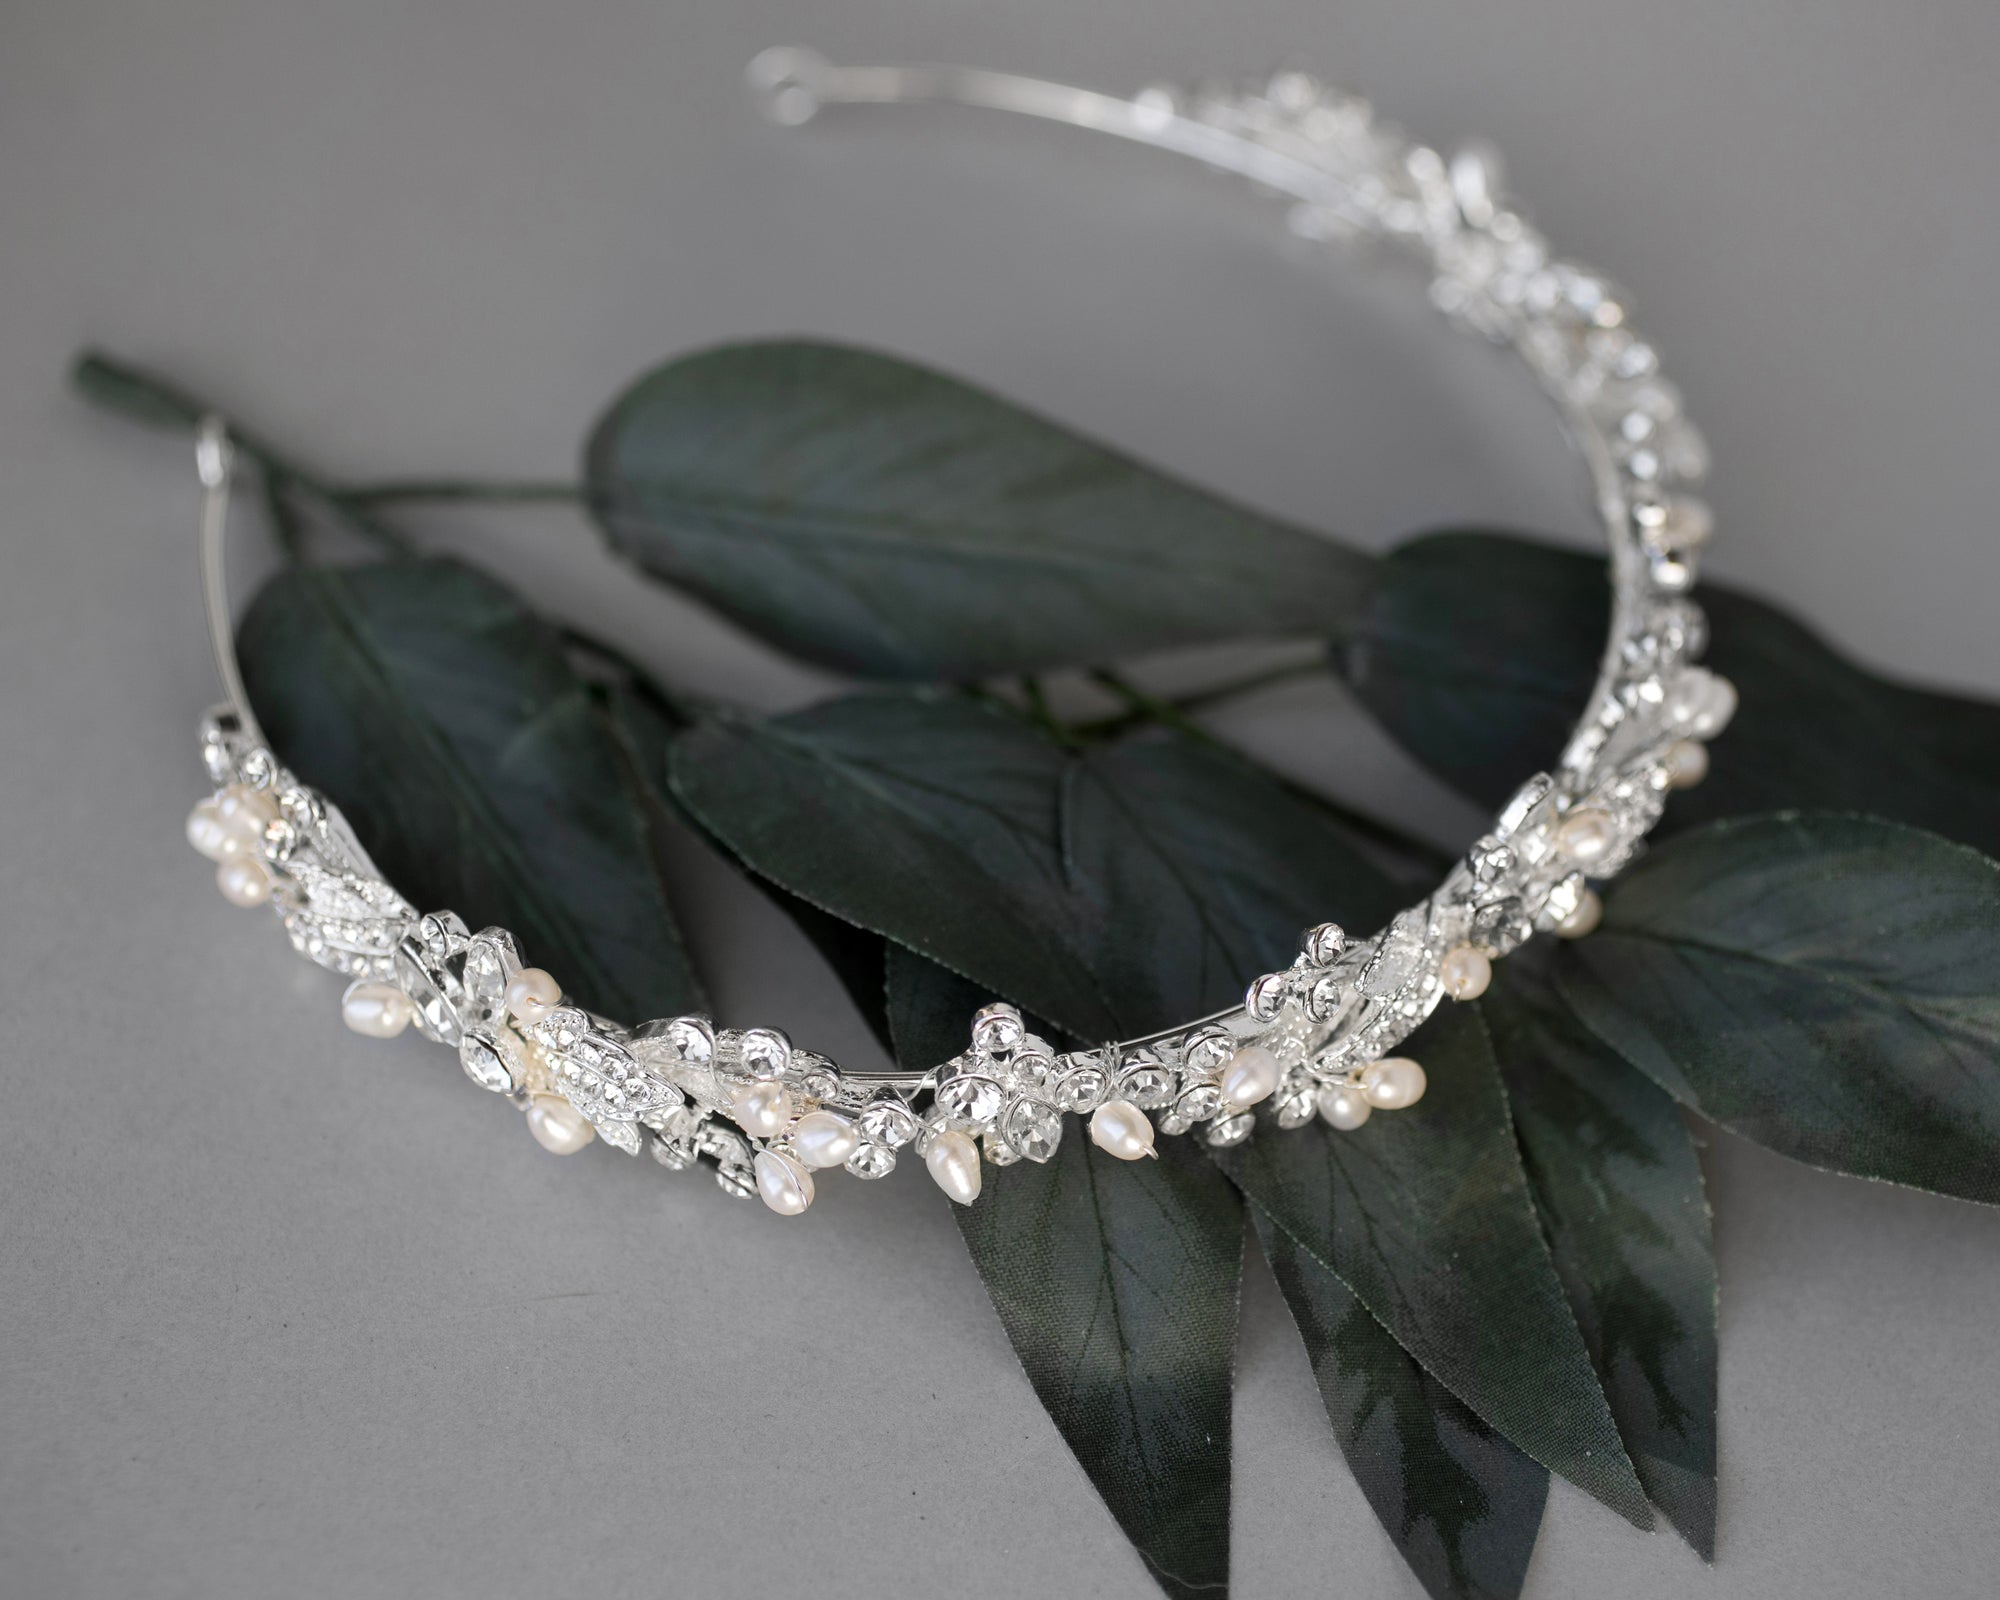 Bridal Headpiece of Crystals and Freshwater Pearls - Cassandra Lynne